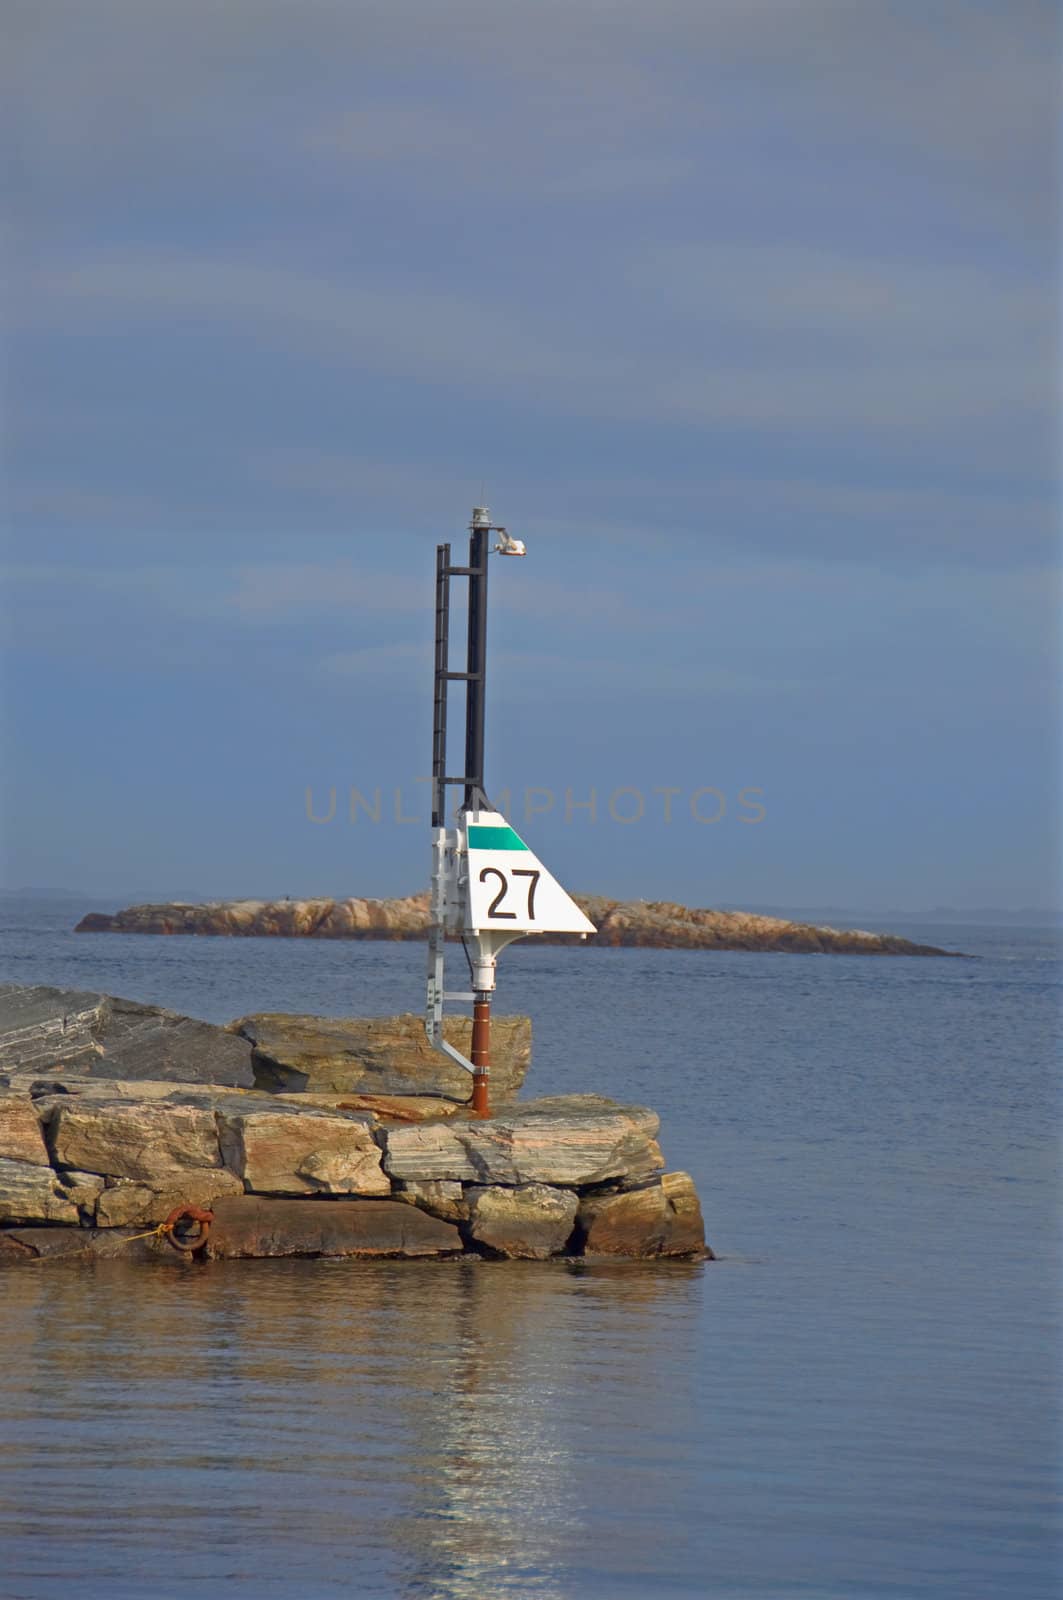 Maritime light signal by GryT